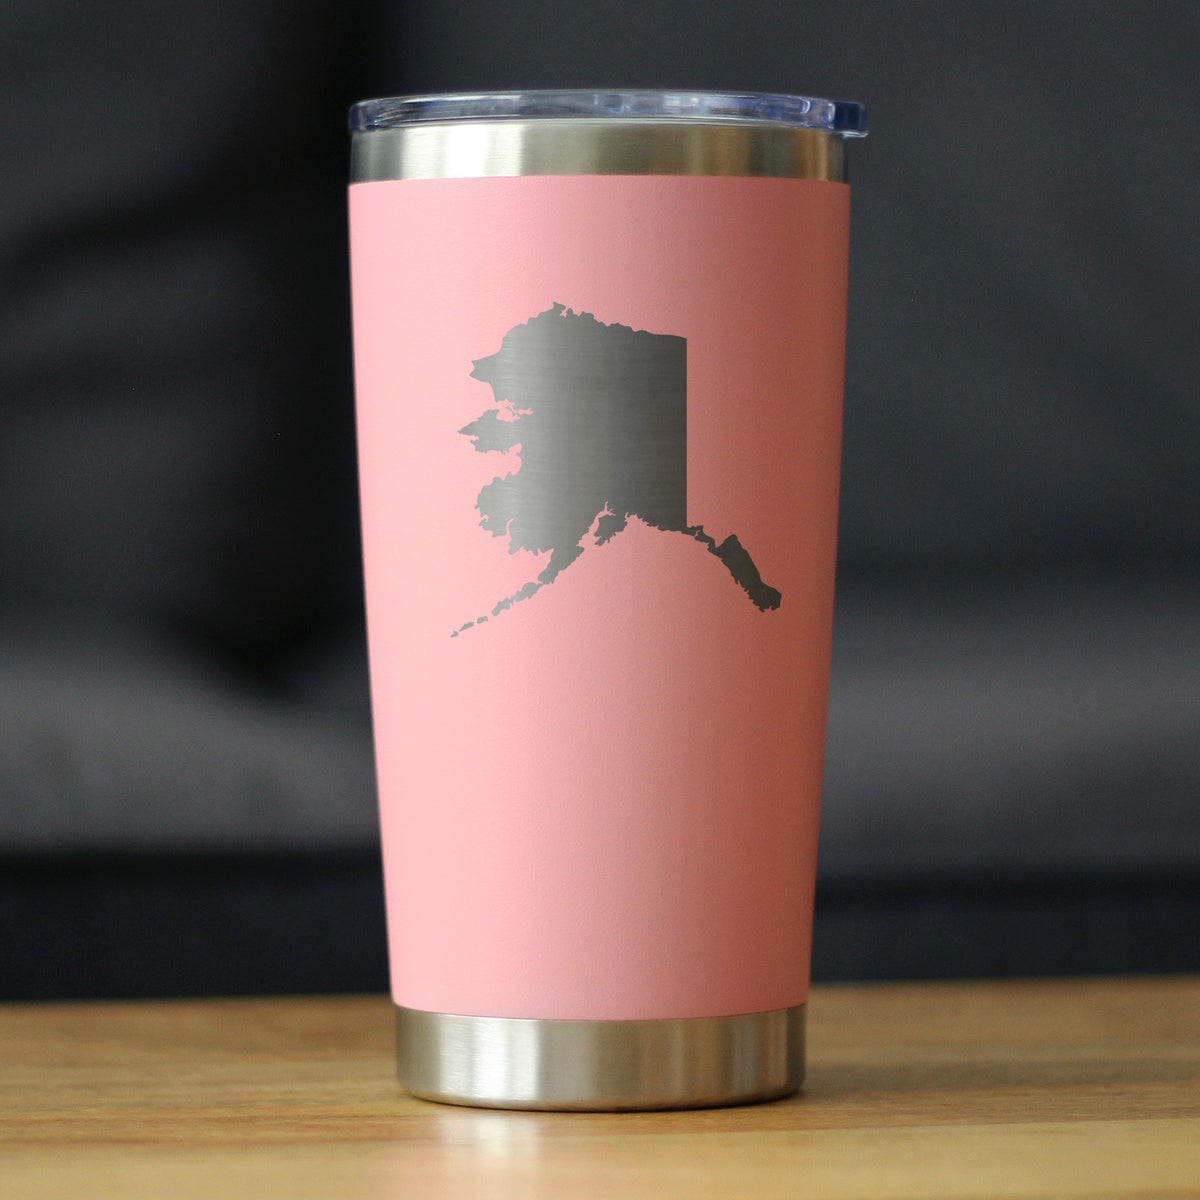 Alaska State Outline - Insulated Coffee Tumbler Cup with Sliding Lid - Stainless Steel Travel Mug - Alaska Gifts and Decor for Women and Men Alaskans